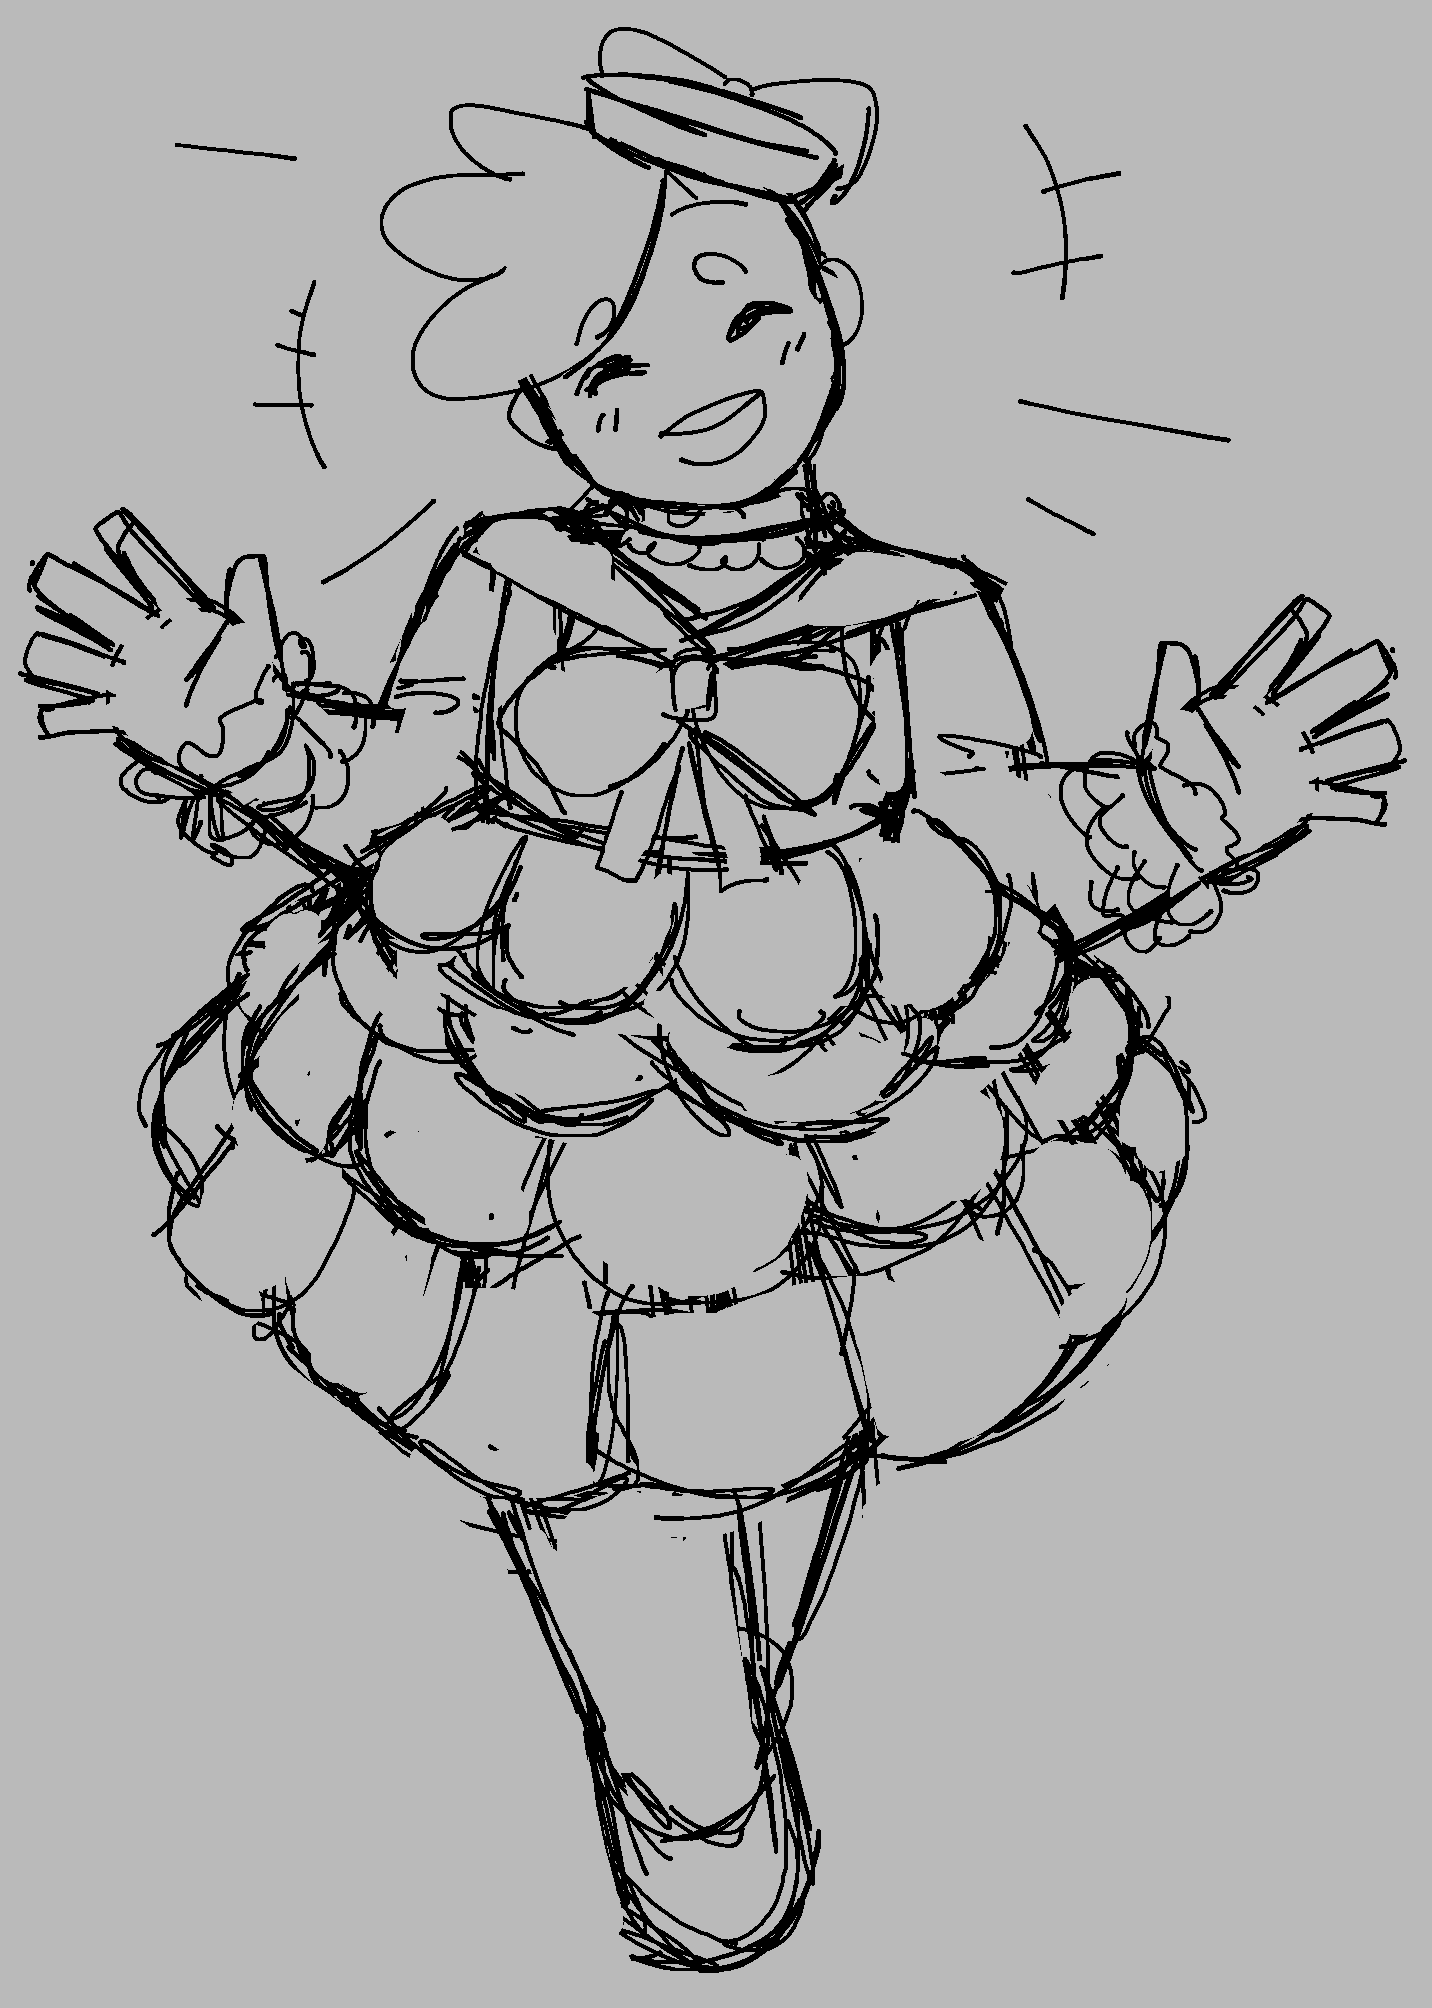 a sketch of goby wearing a sailor dress with a layered frilly skirt